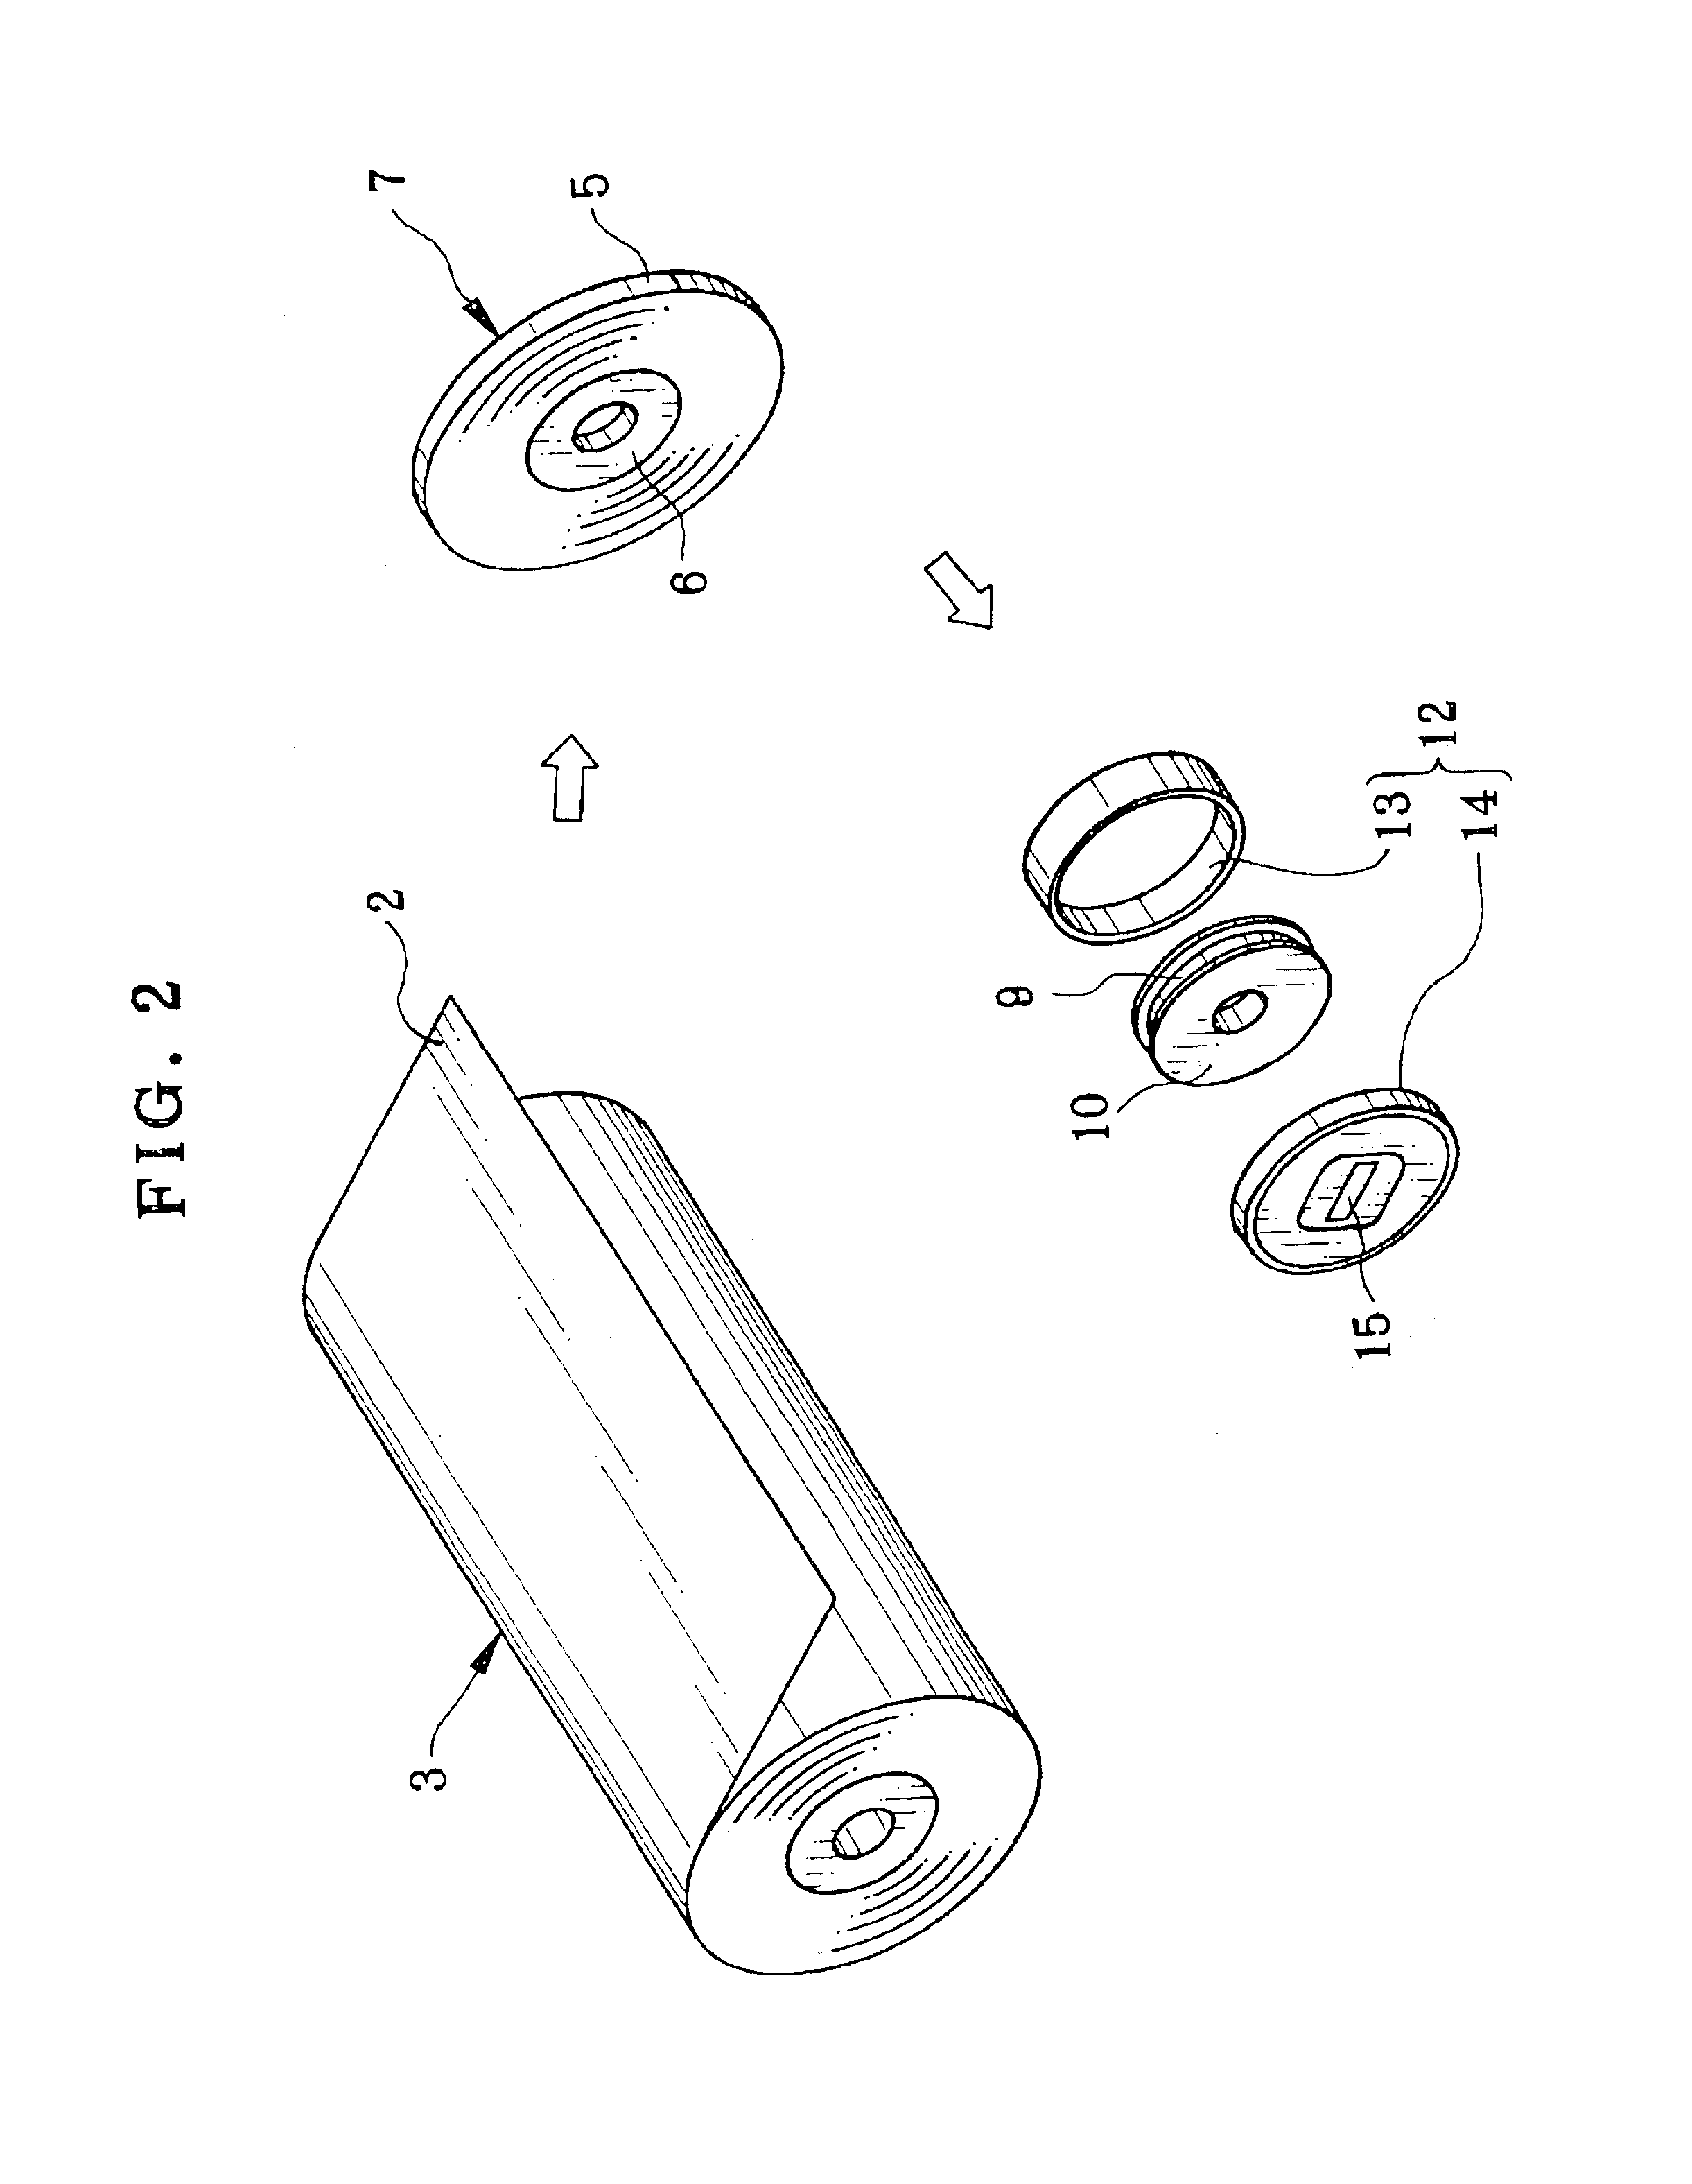 Production managing method for photo film production